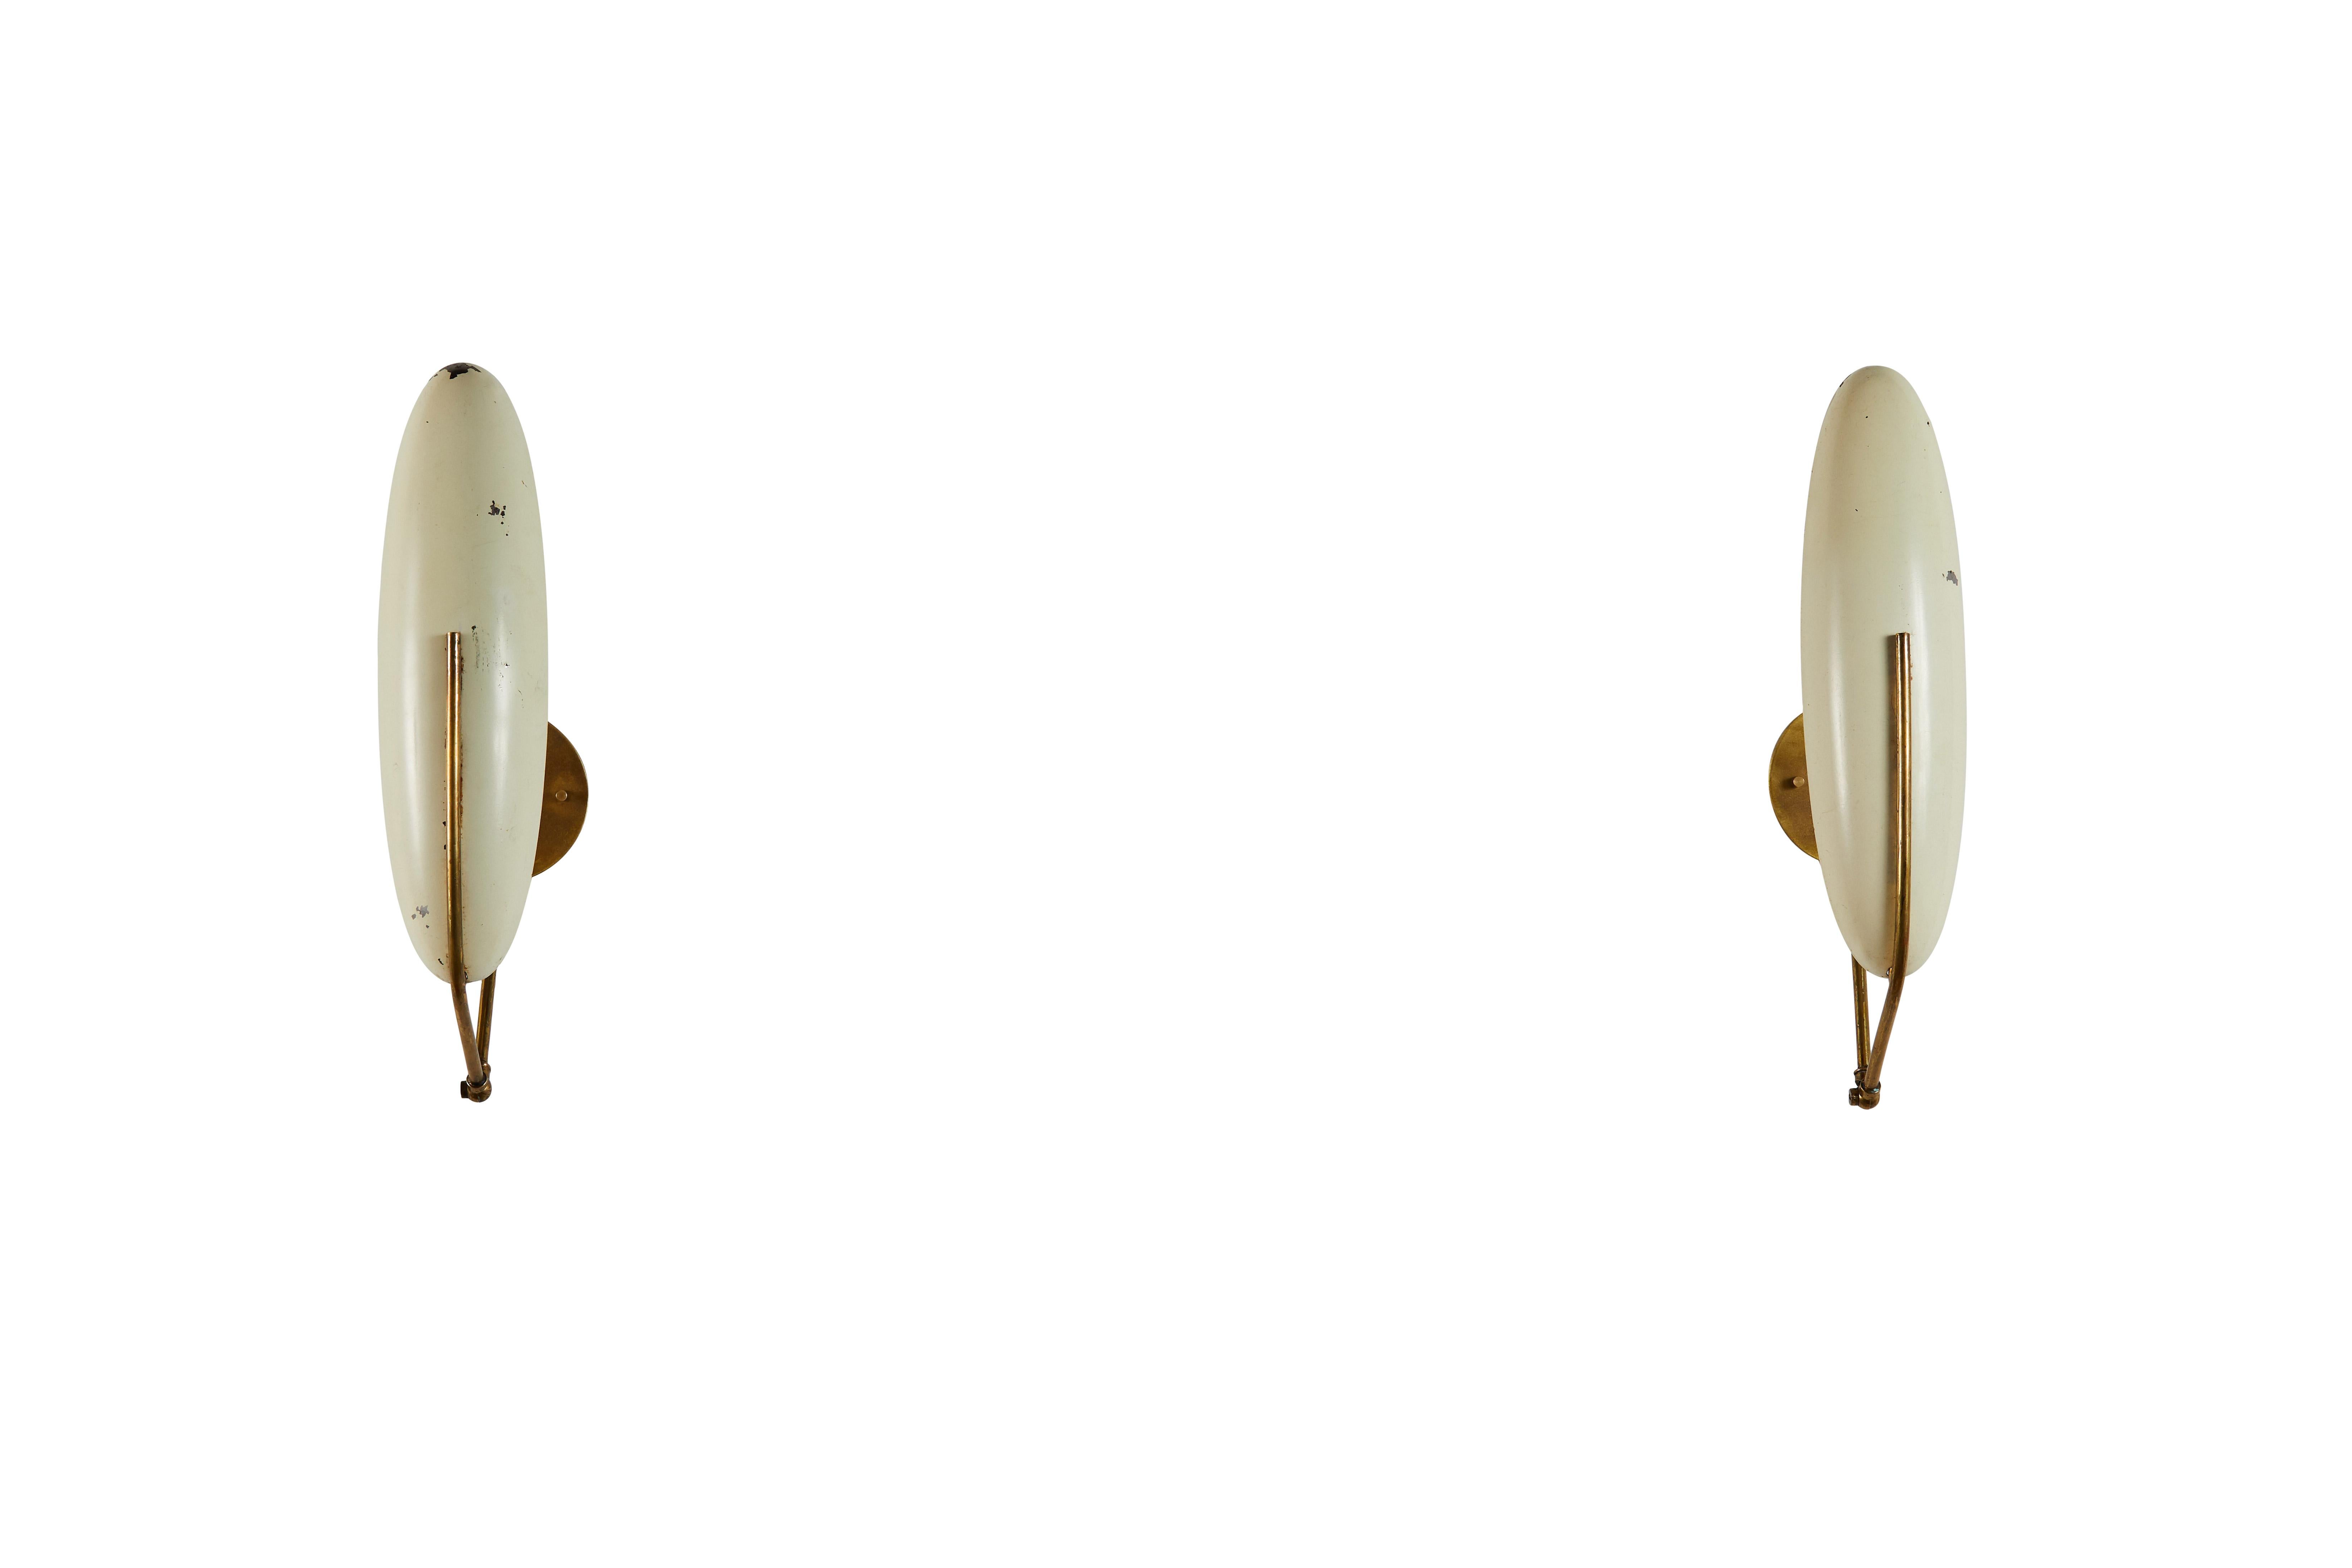 Pair of Sconces by Gilardi & Barzaghi. Designed and manufactured in Italy, circa 1950s. Enameled metal and brass. Rewired for U.S. junction boxes. Custom brass backplates. Each light takes one E27 50w maximum bulb. Bulbs provided as a onetime